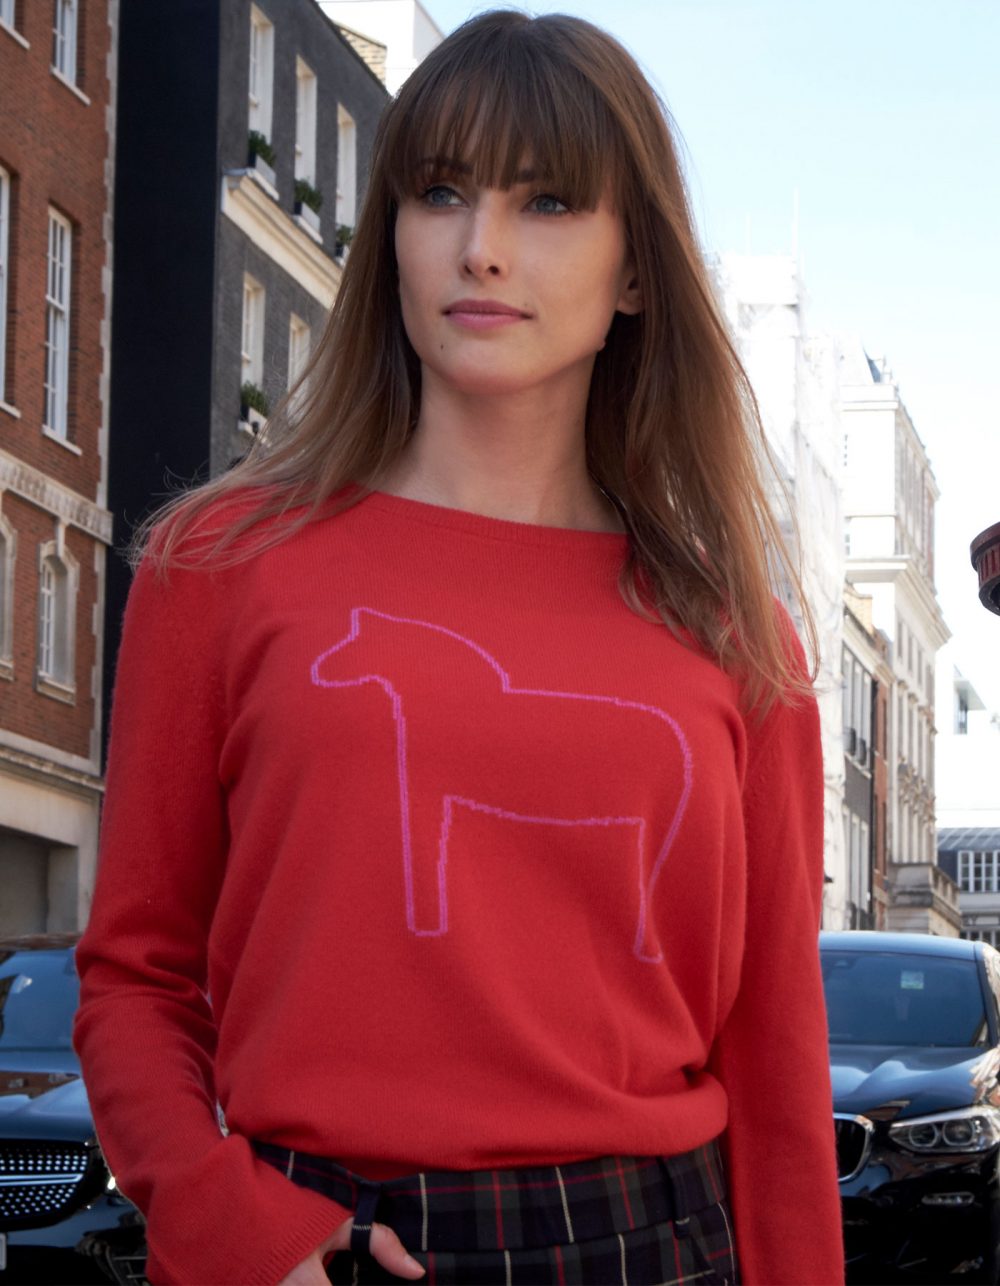 Woman on a street, promoting malin darlin Dalahast horse cashmere jumpers, a pony shown on red cashmere.